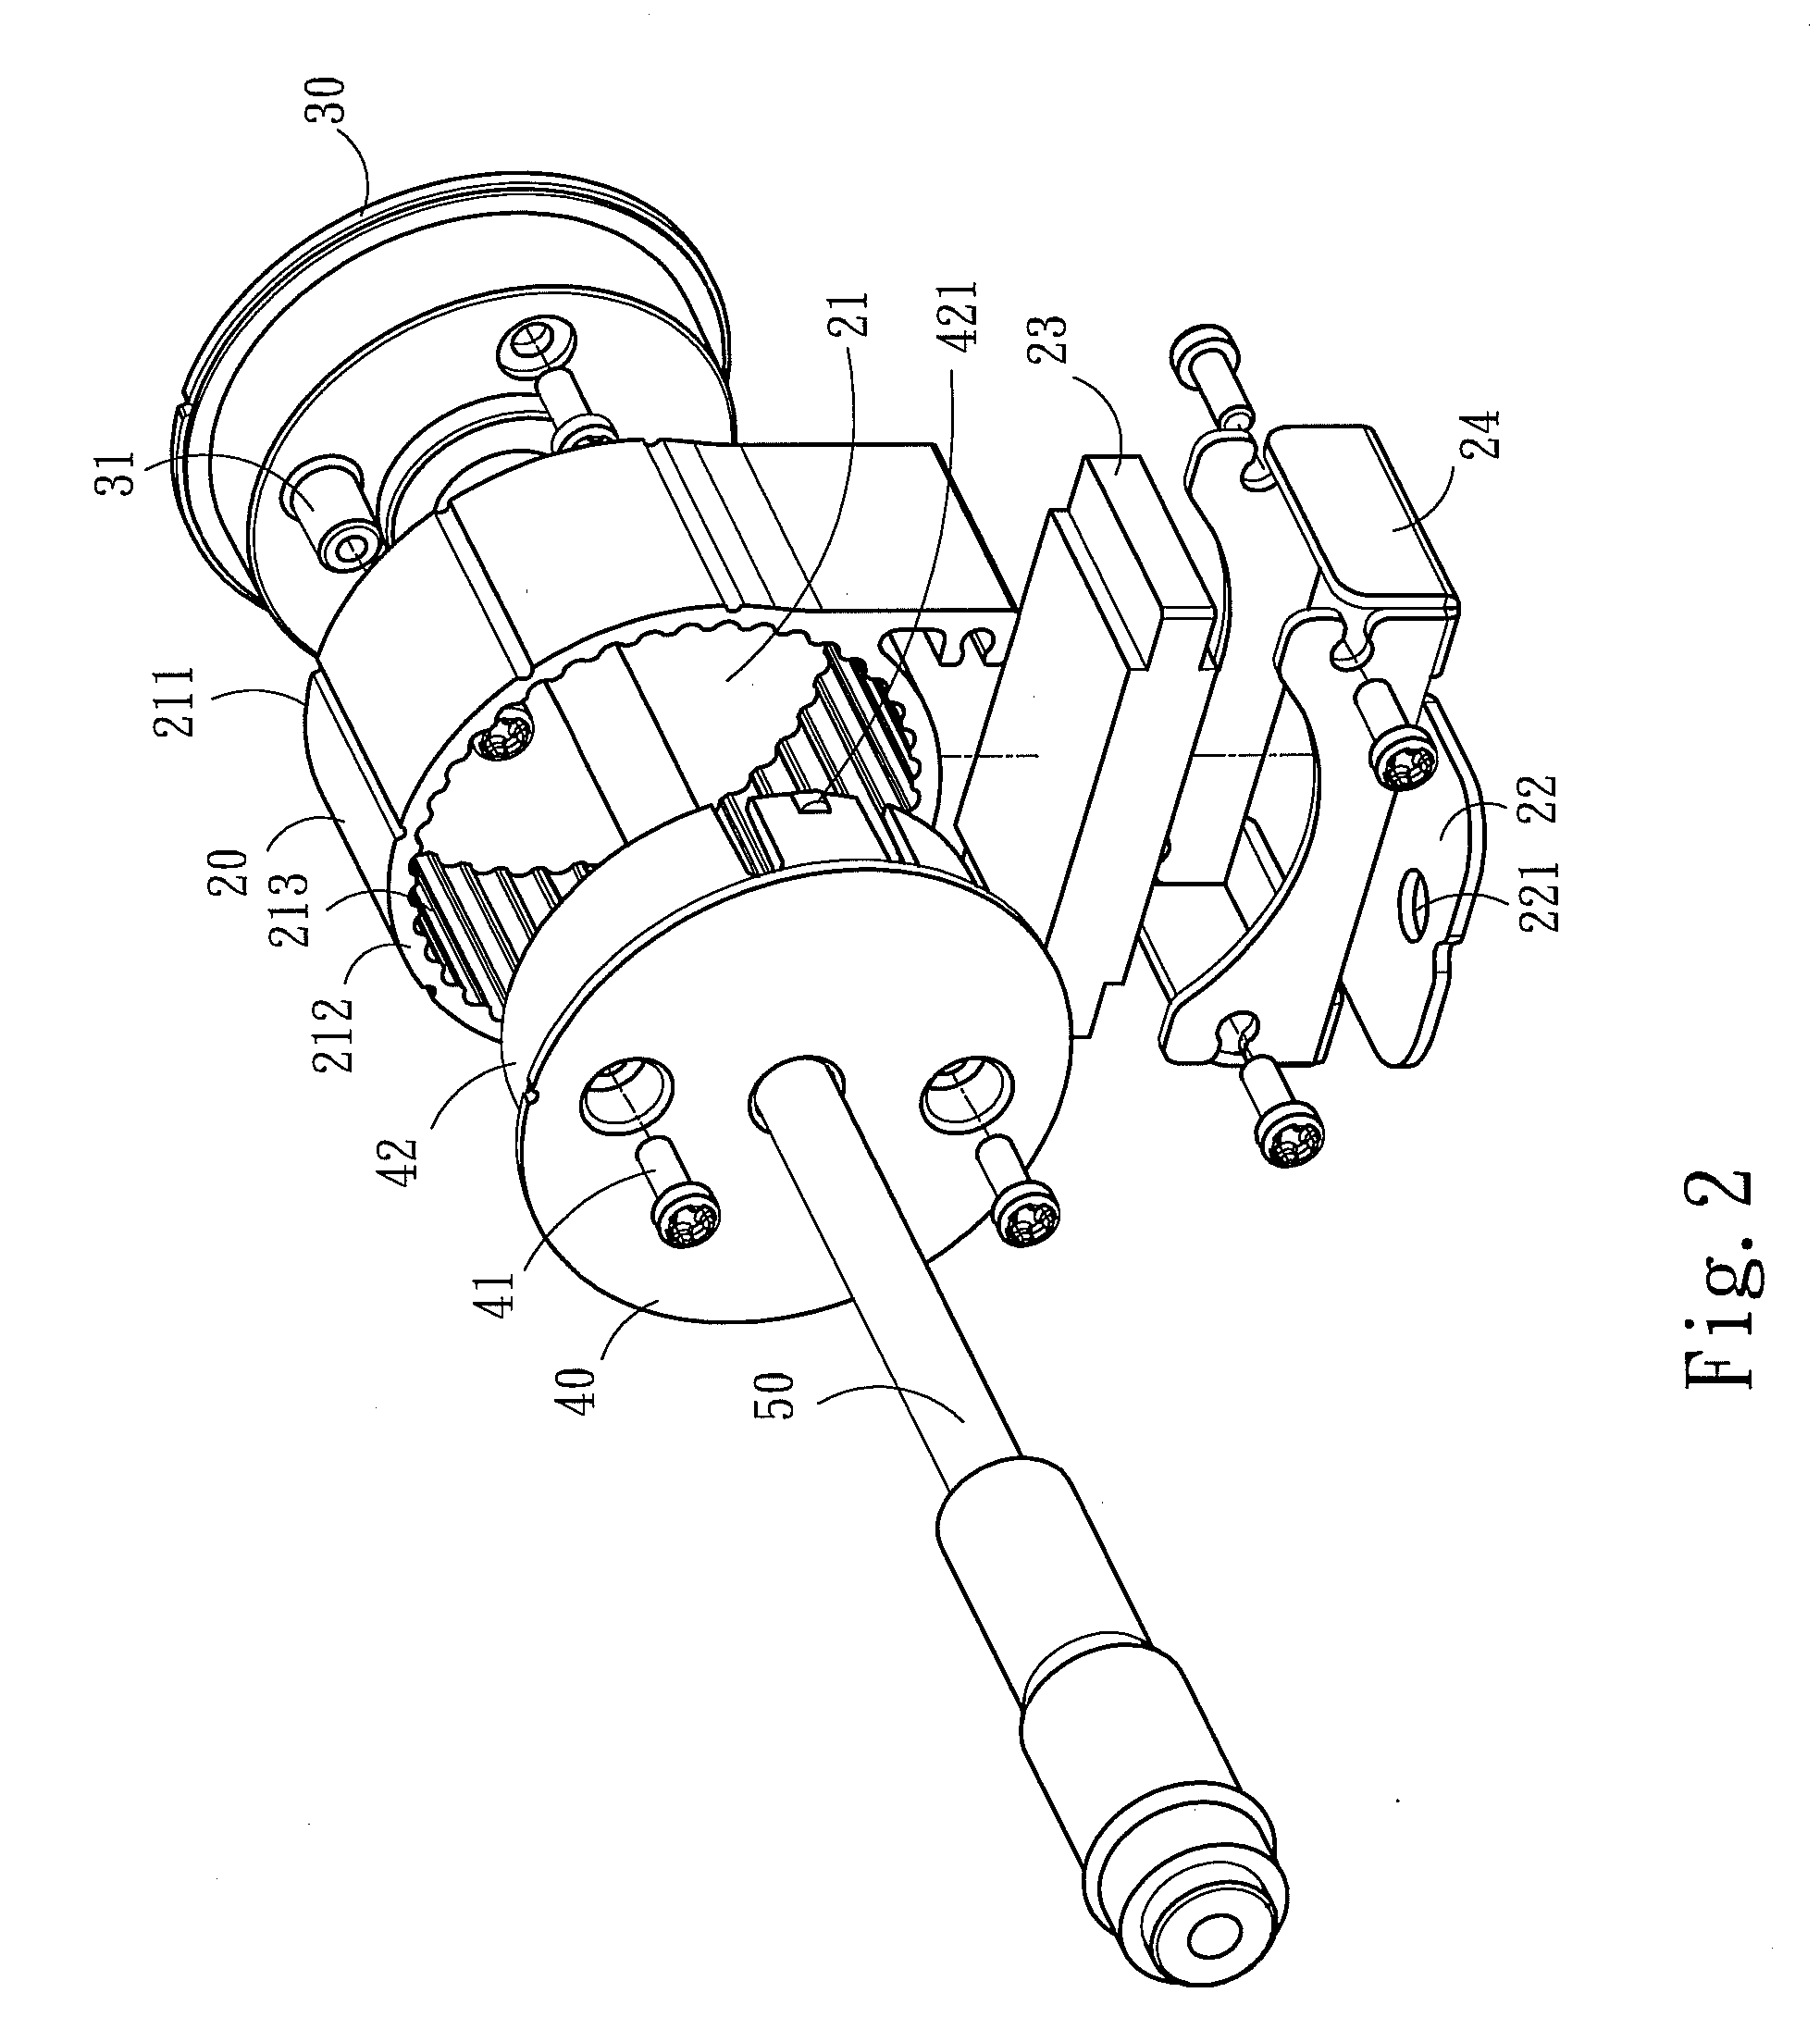 Light source assembly mechanism for LED lamps